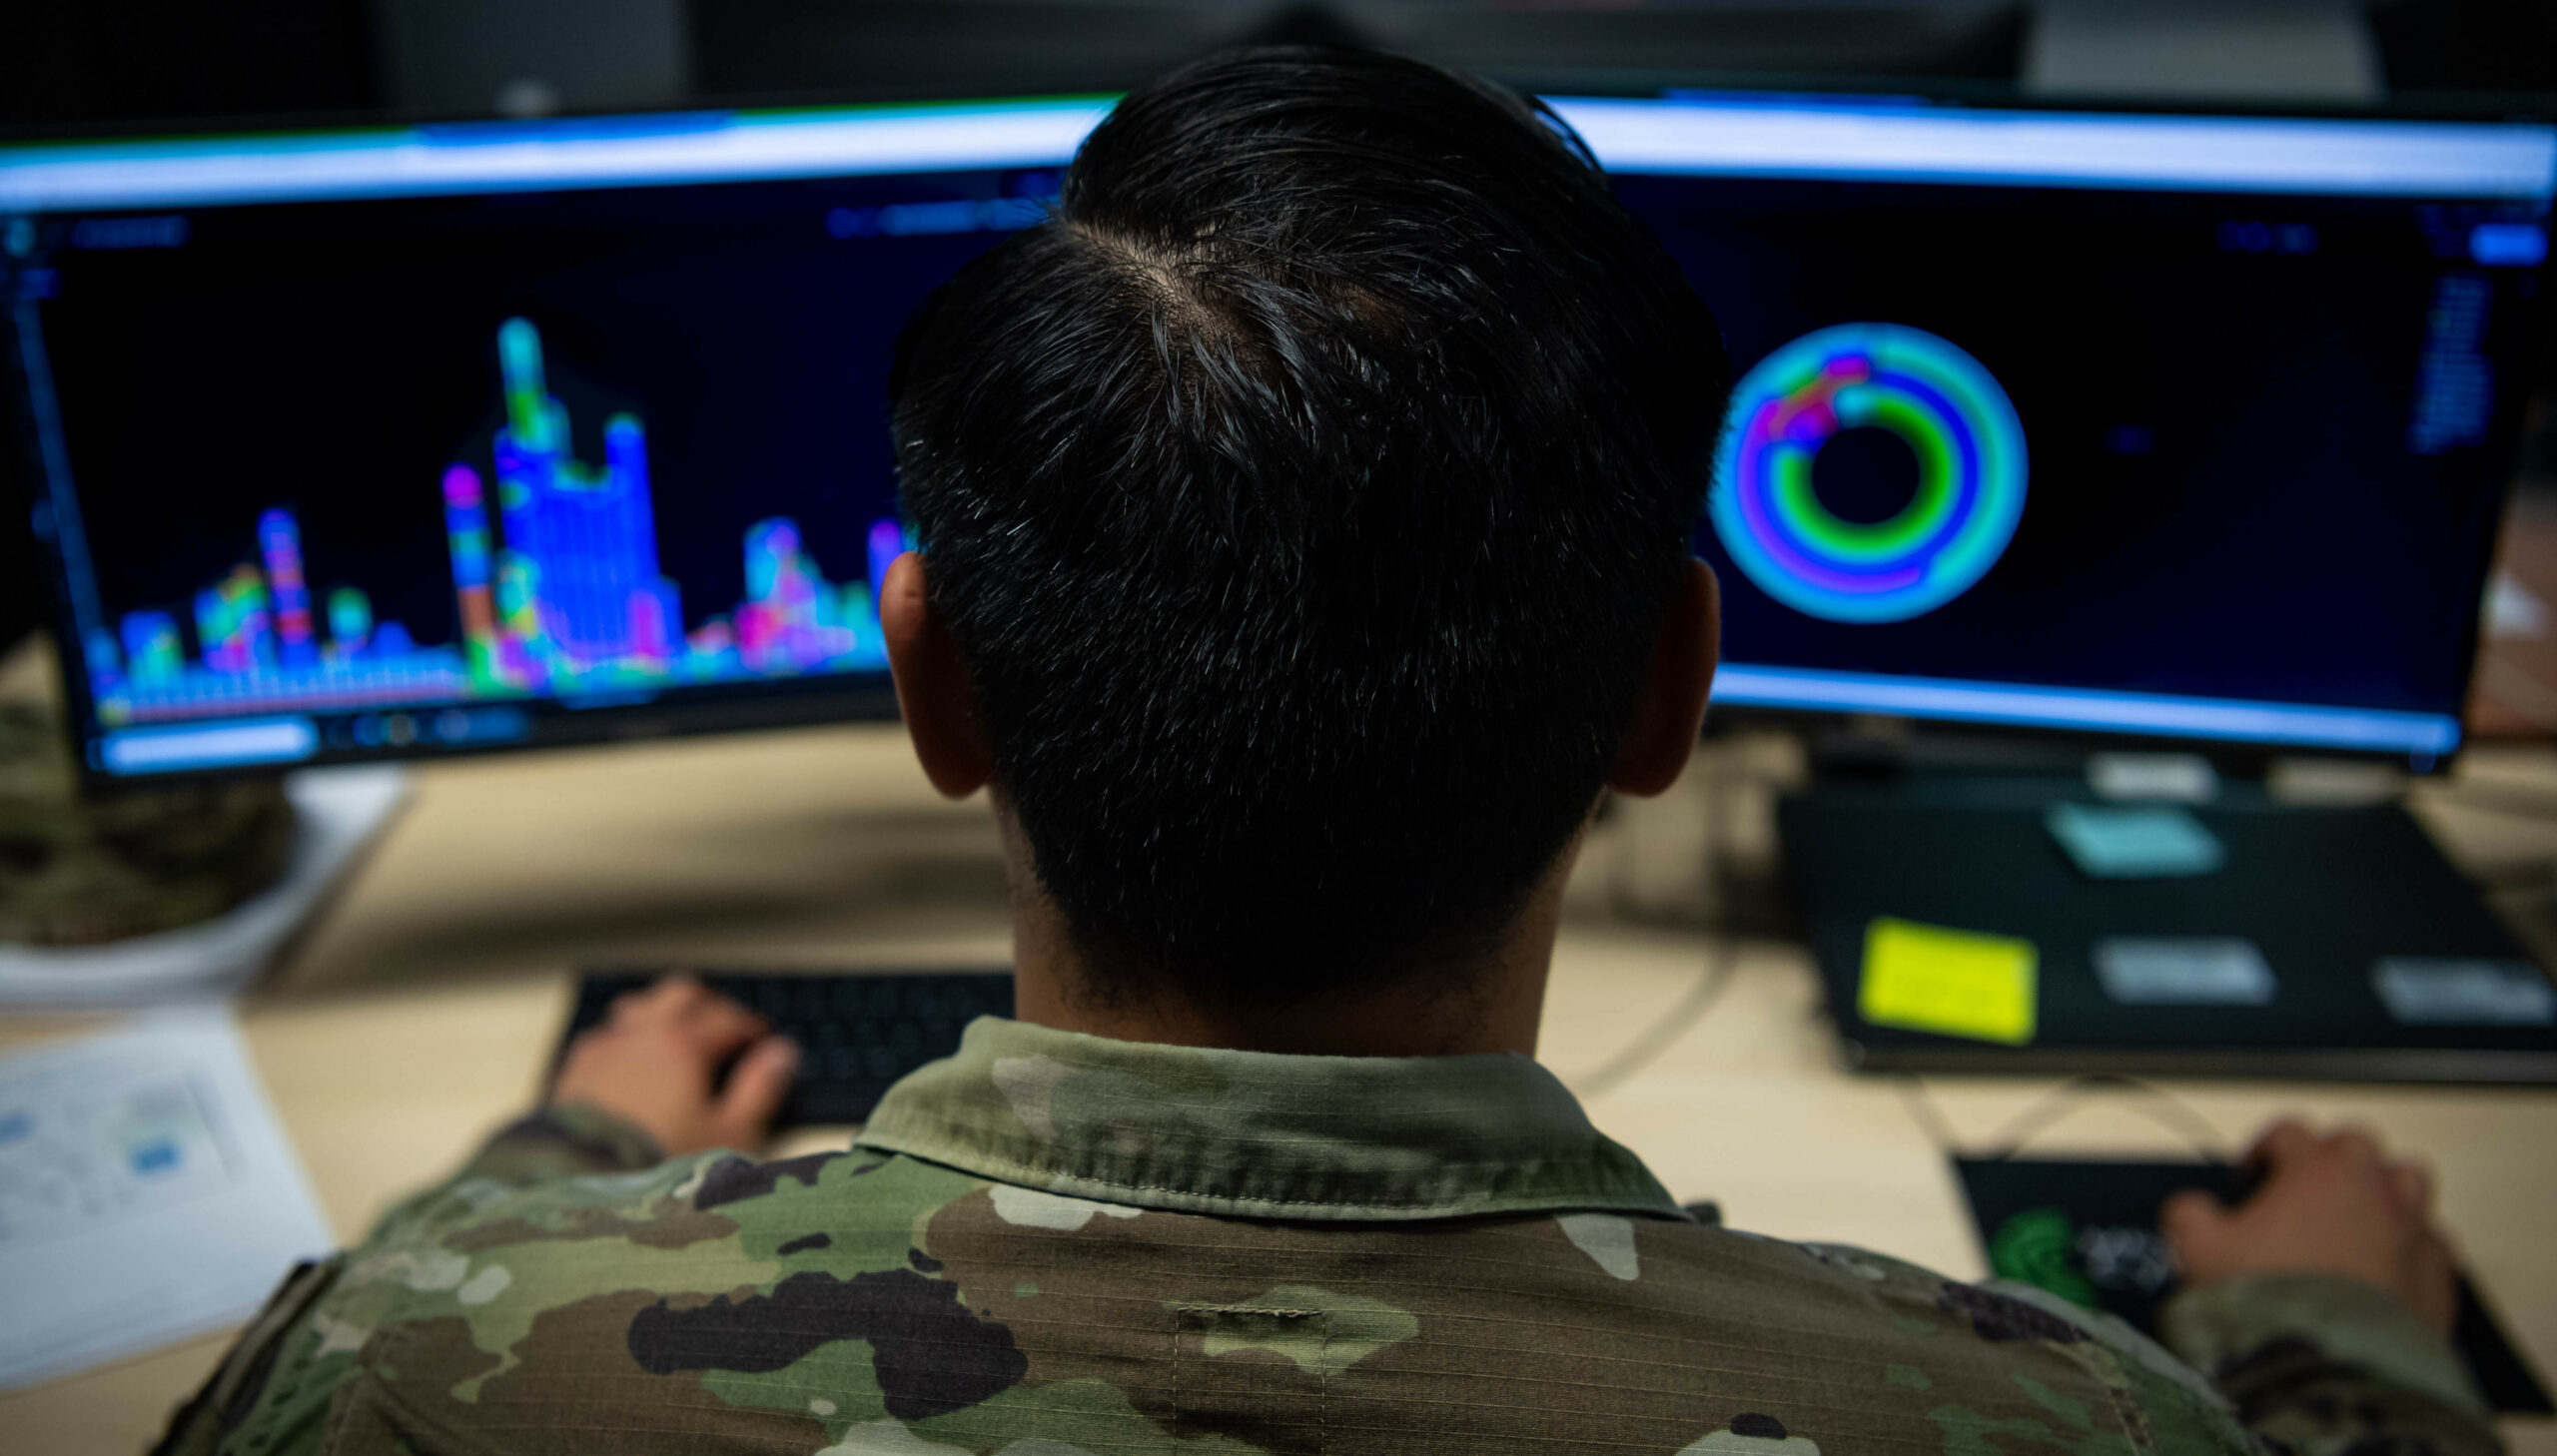 U.S. Air Force Staff Sgt. Marj Alfaro, 52nd Communications Squadron mission defense team supervisor assigned to Spangdahlem Air Base, Germany, performs network analysis during exercise Tacet Venari at Ramstein Air Base, Germany, May 17, 2022. Tacet Venari is a two-week cyber exercise that provides Airmen the opportunity to identify, detect and respond to cyber threats. The hands-on experience the exercise provides prepares Airmen for real-world cyber threat scenarios. (U.S. Air Force photo by Airman 1st Class Jared Lovett)